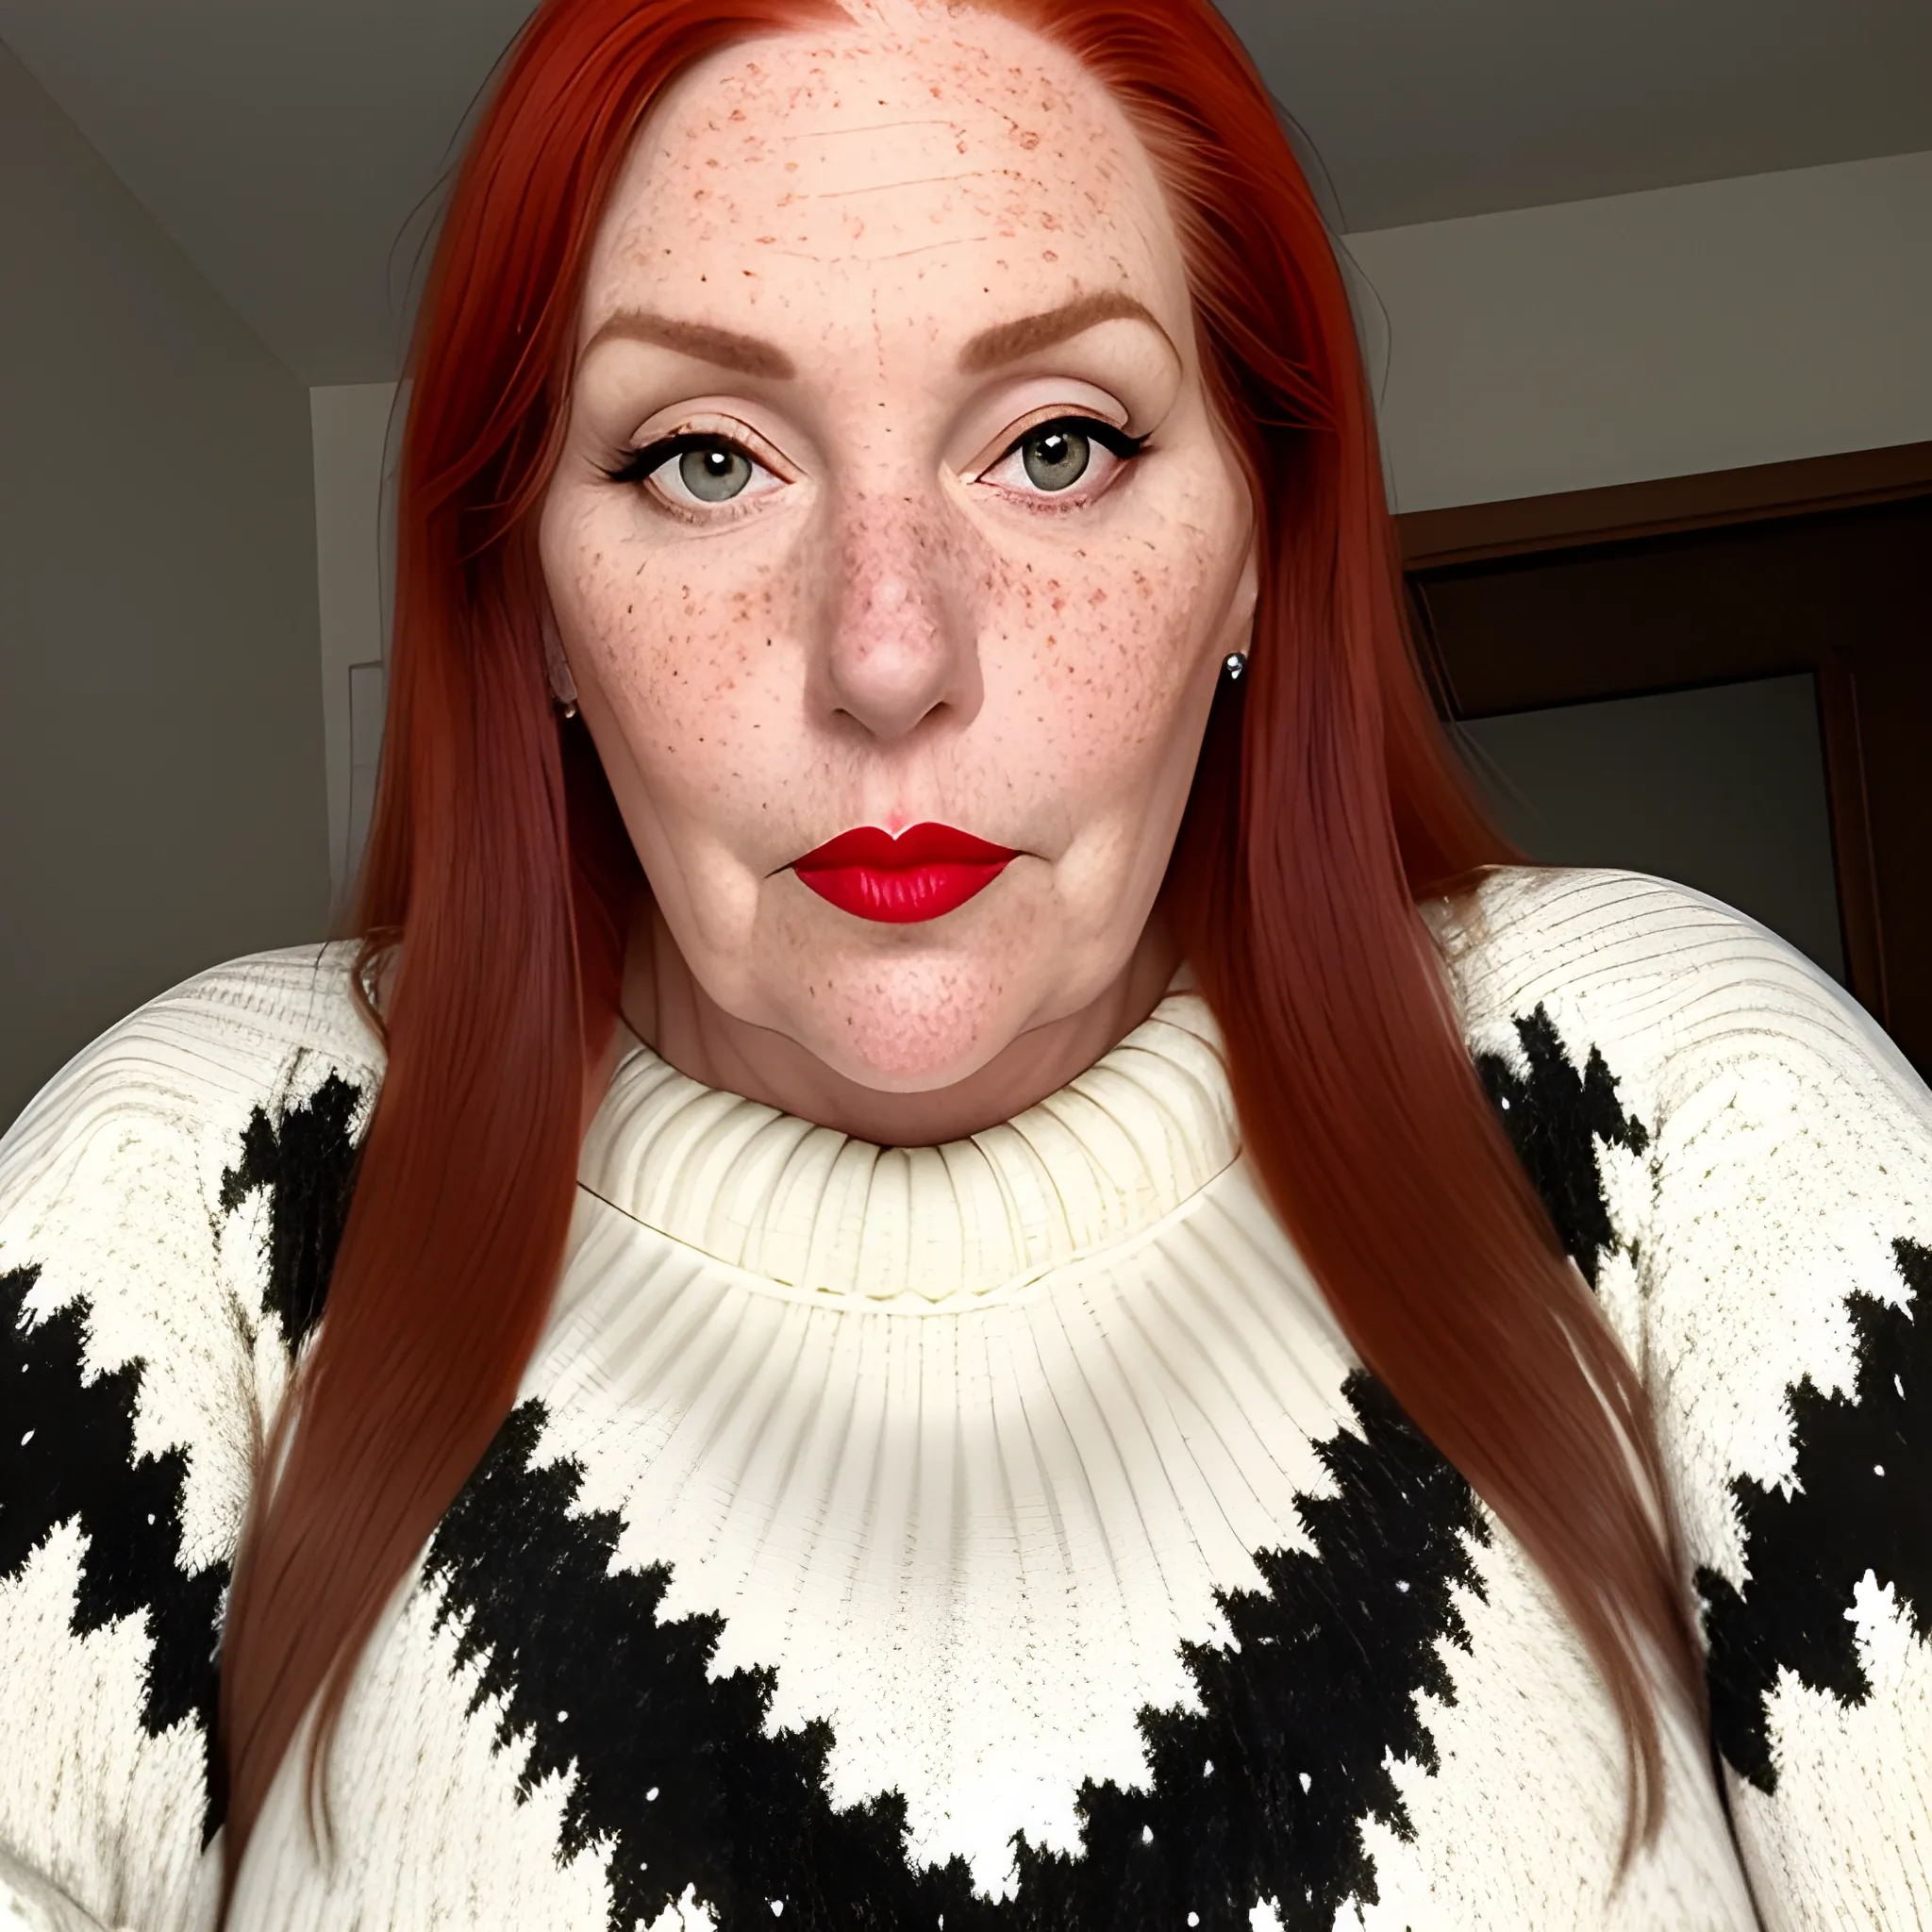 Tall beautiful plus sized, ample, middle-aged  American Woman, long straight red hair, full lips, full face, freckles, fitted white and black patterned sweater, looking down at the camera, up close pov, detailed, warm lighting 